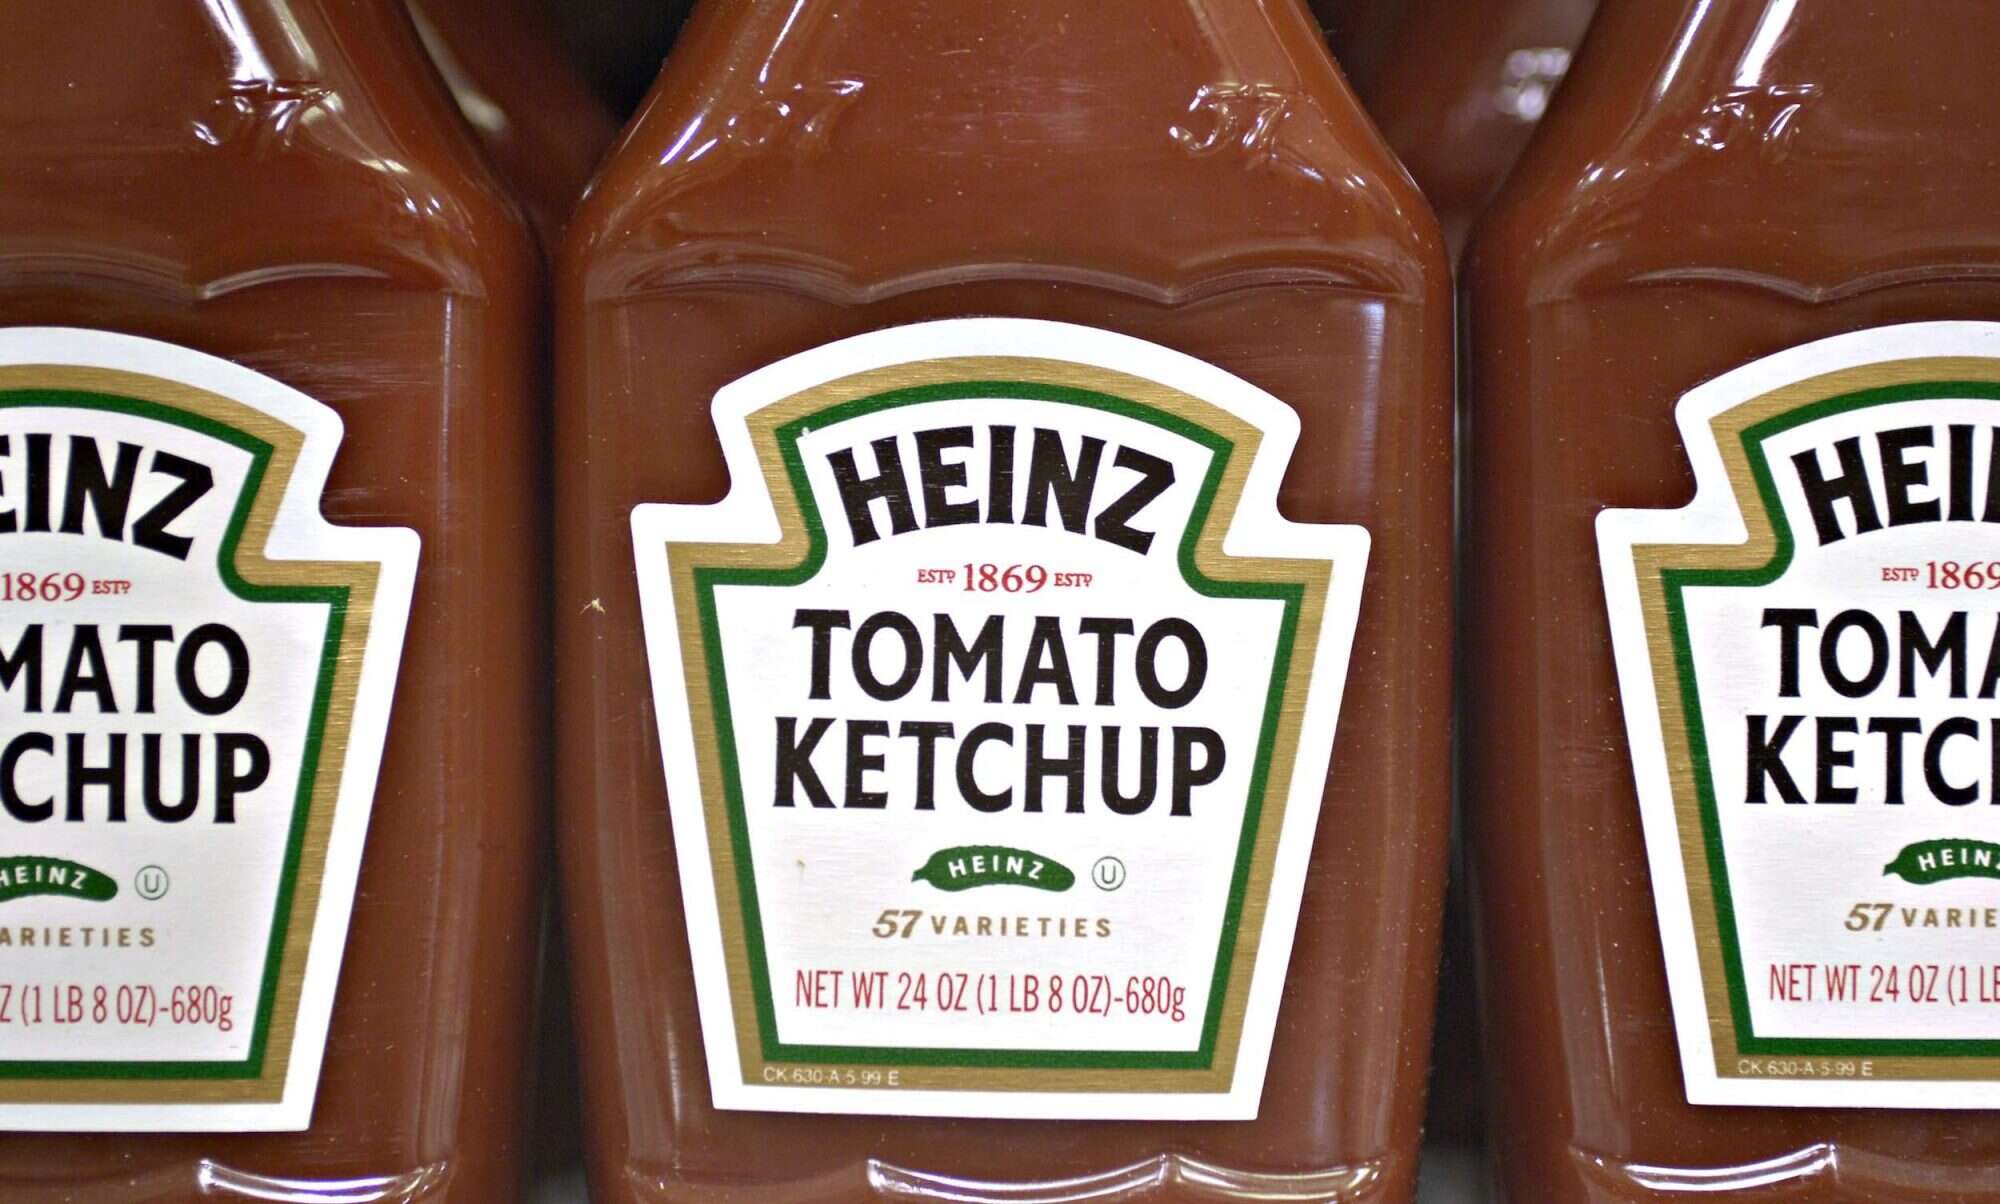 What's in Heinz Ketchup?